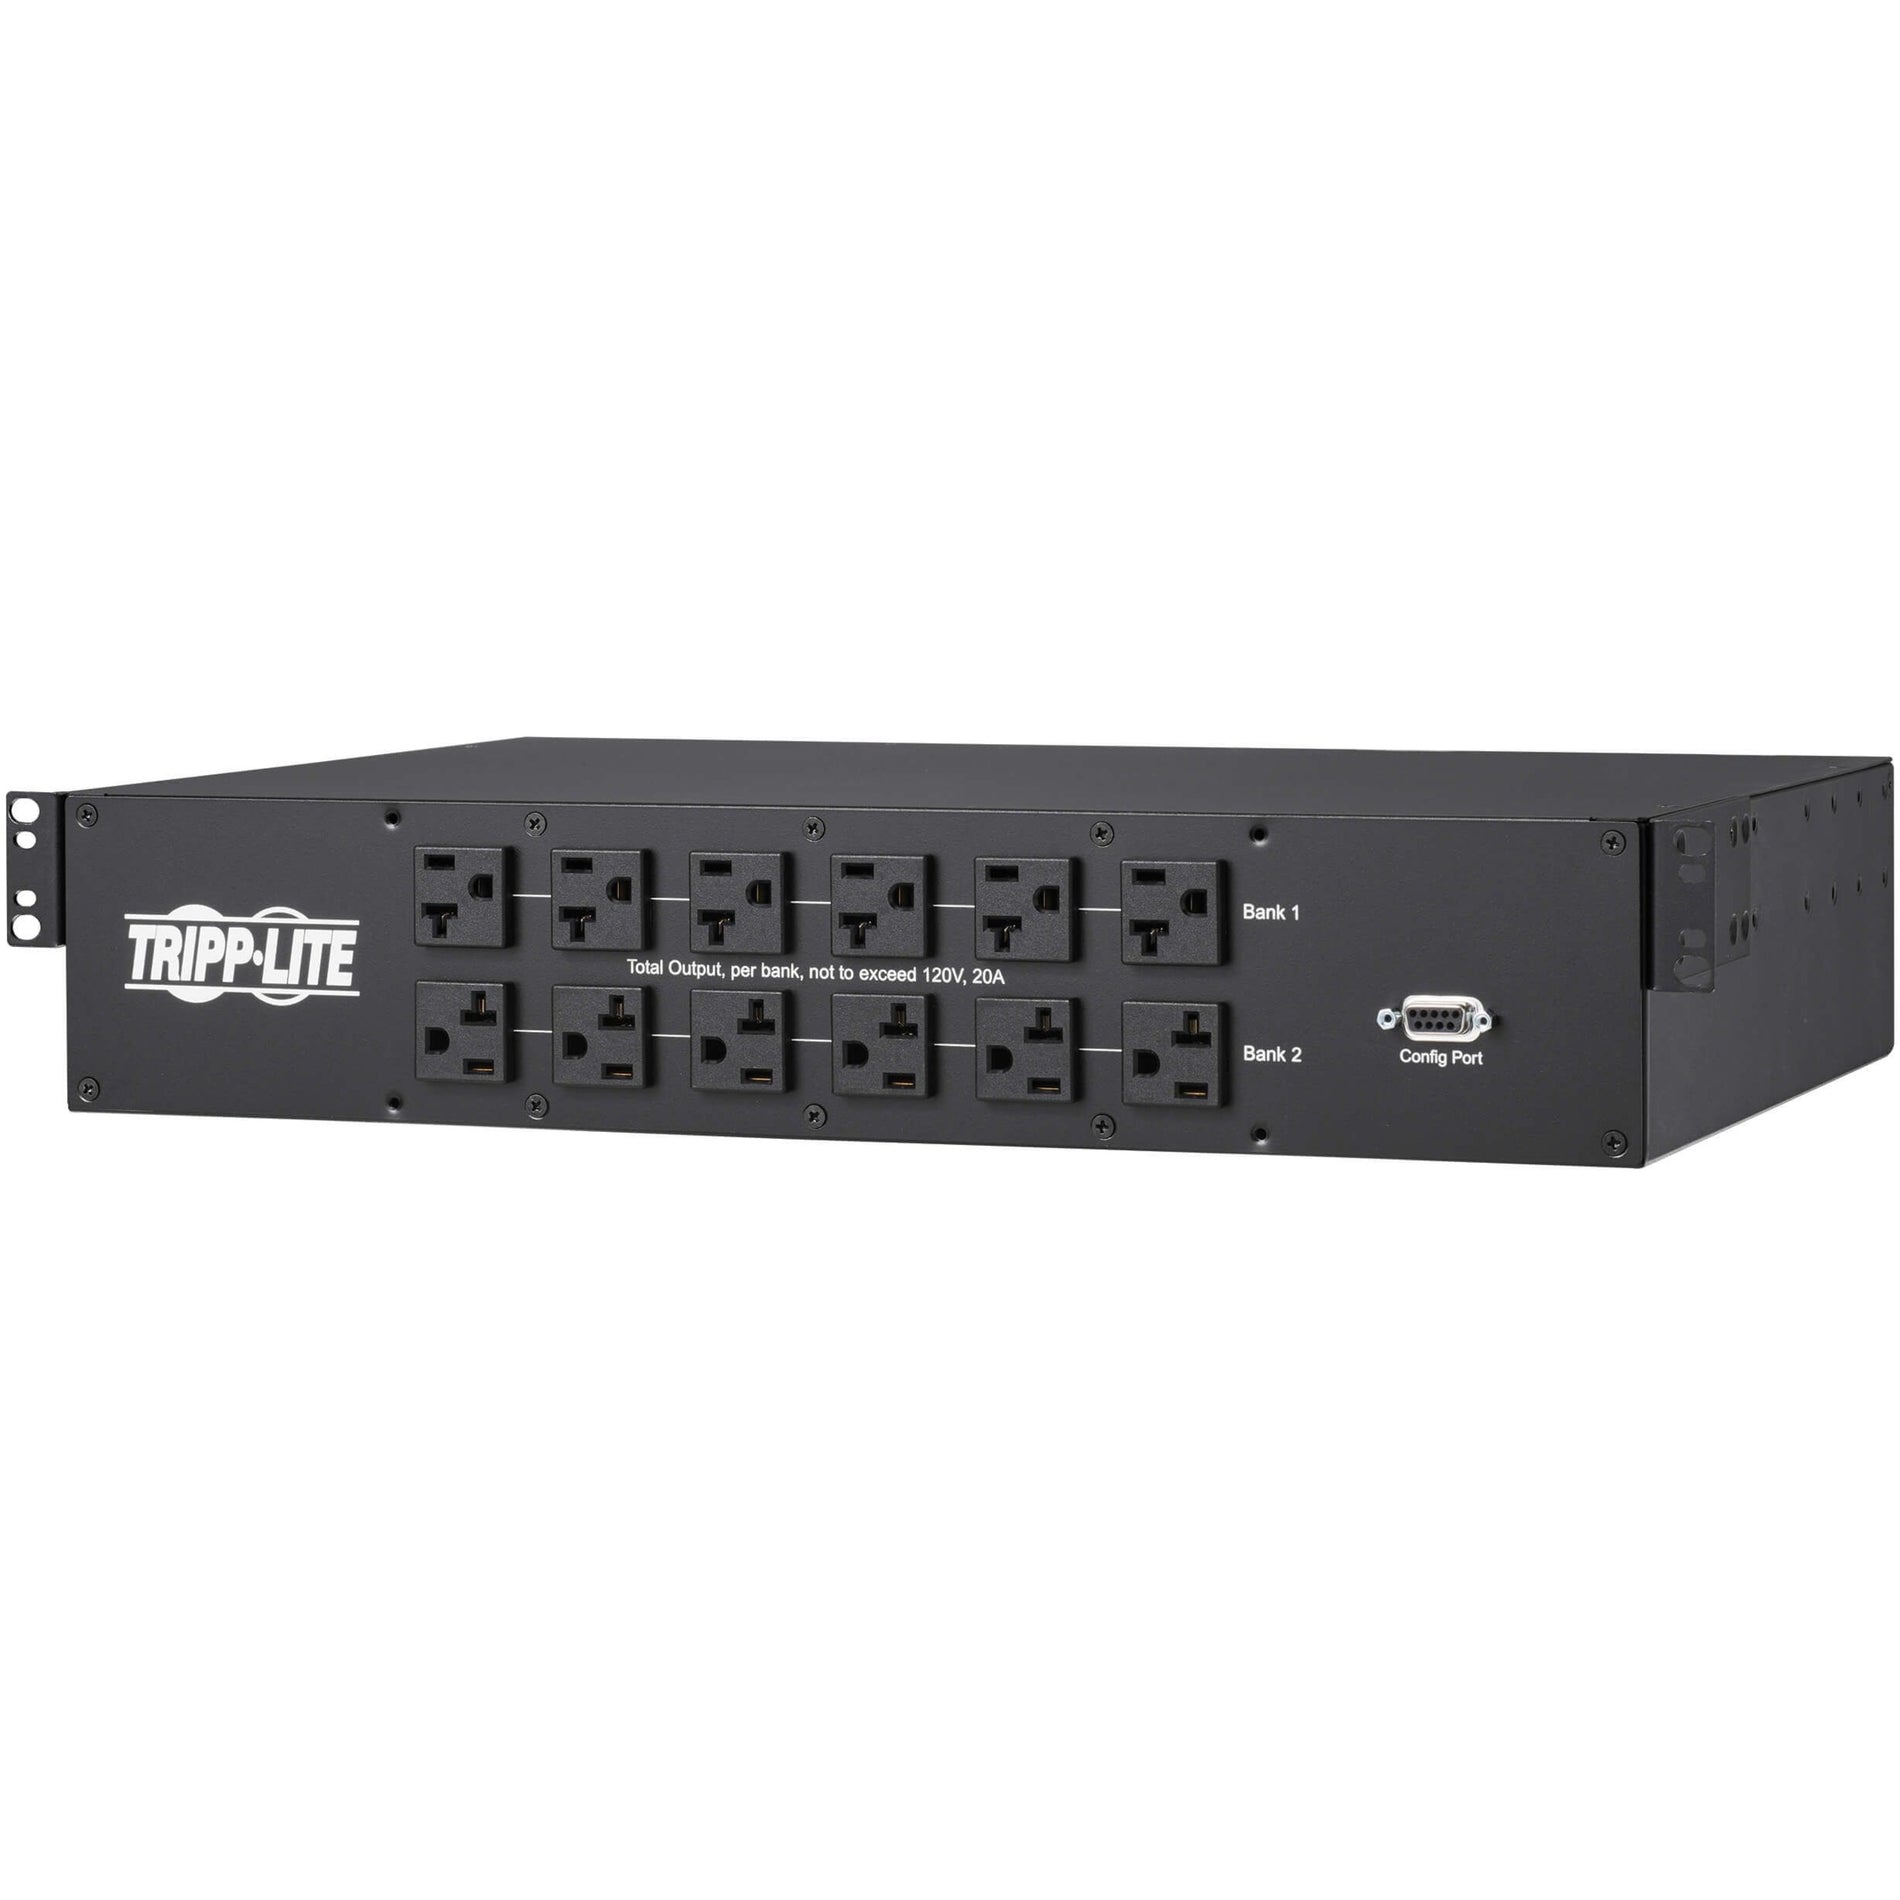 Tripp Lite PDUMNH30AT2 25-Outlets PDU, 2 Year Warranty, Web Browser, SNMP, Telnet, SSH, TAA Compliant, RoHS Certified, 30A Input Current, 120V AC Input/Output Voltage, 2900VA Power Rating